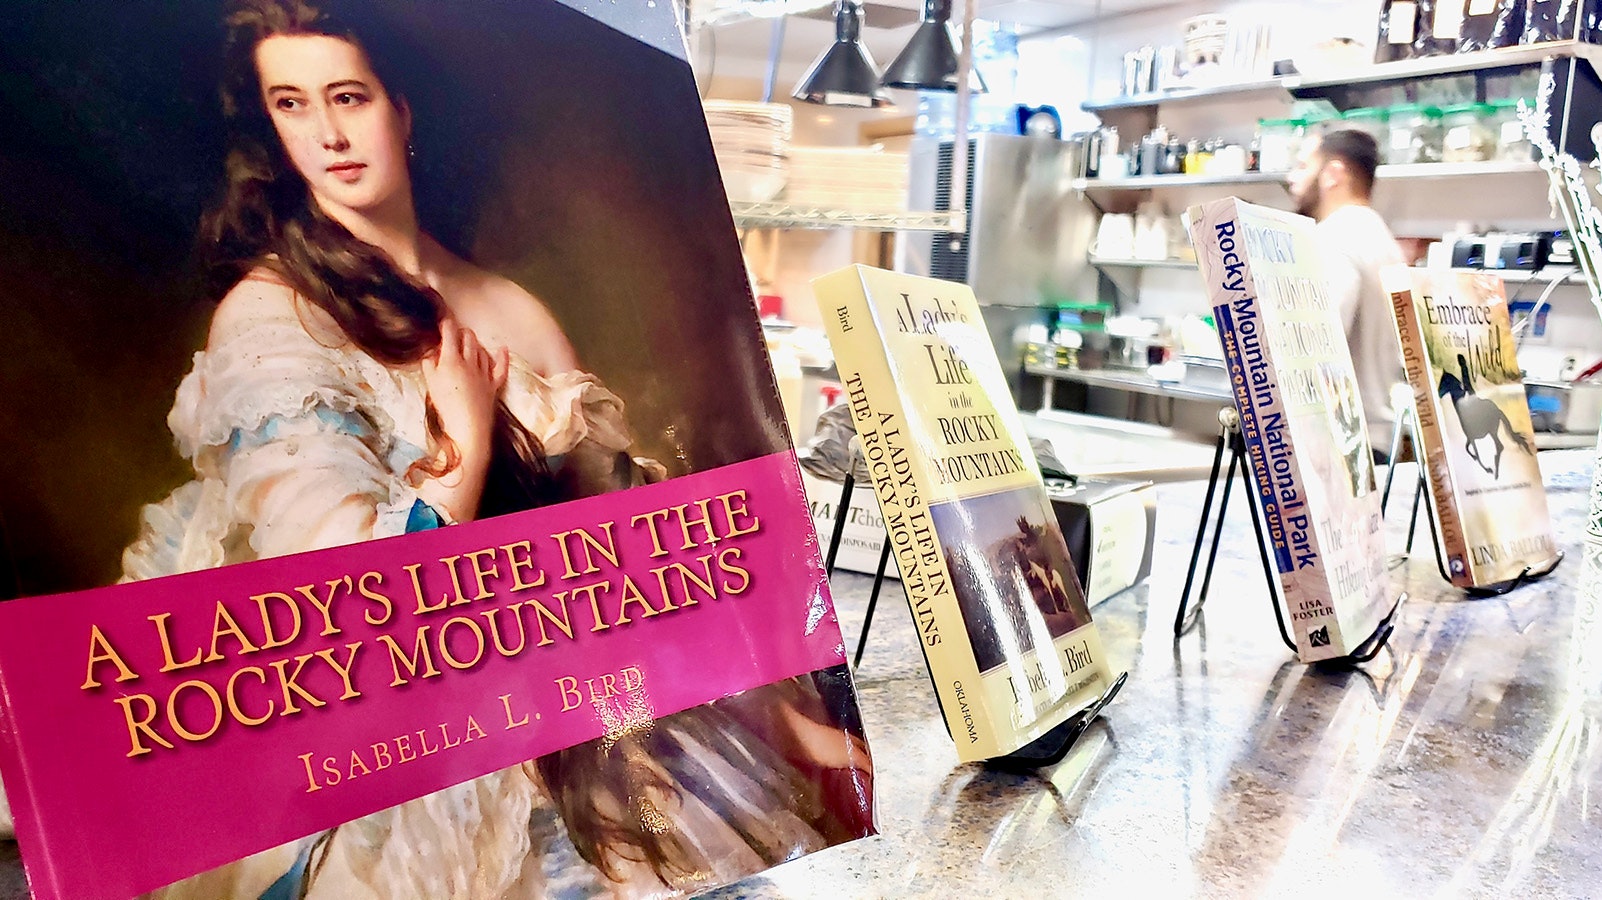 Books about Isabella Bird and Rocky Mountain National Park may be bought at the restaurant.